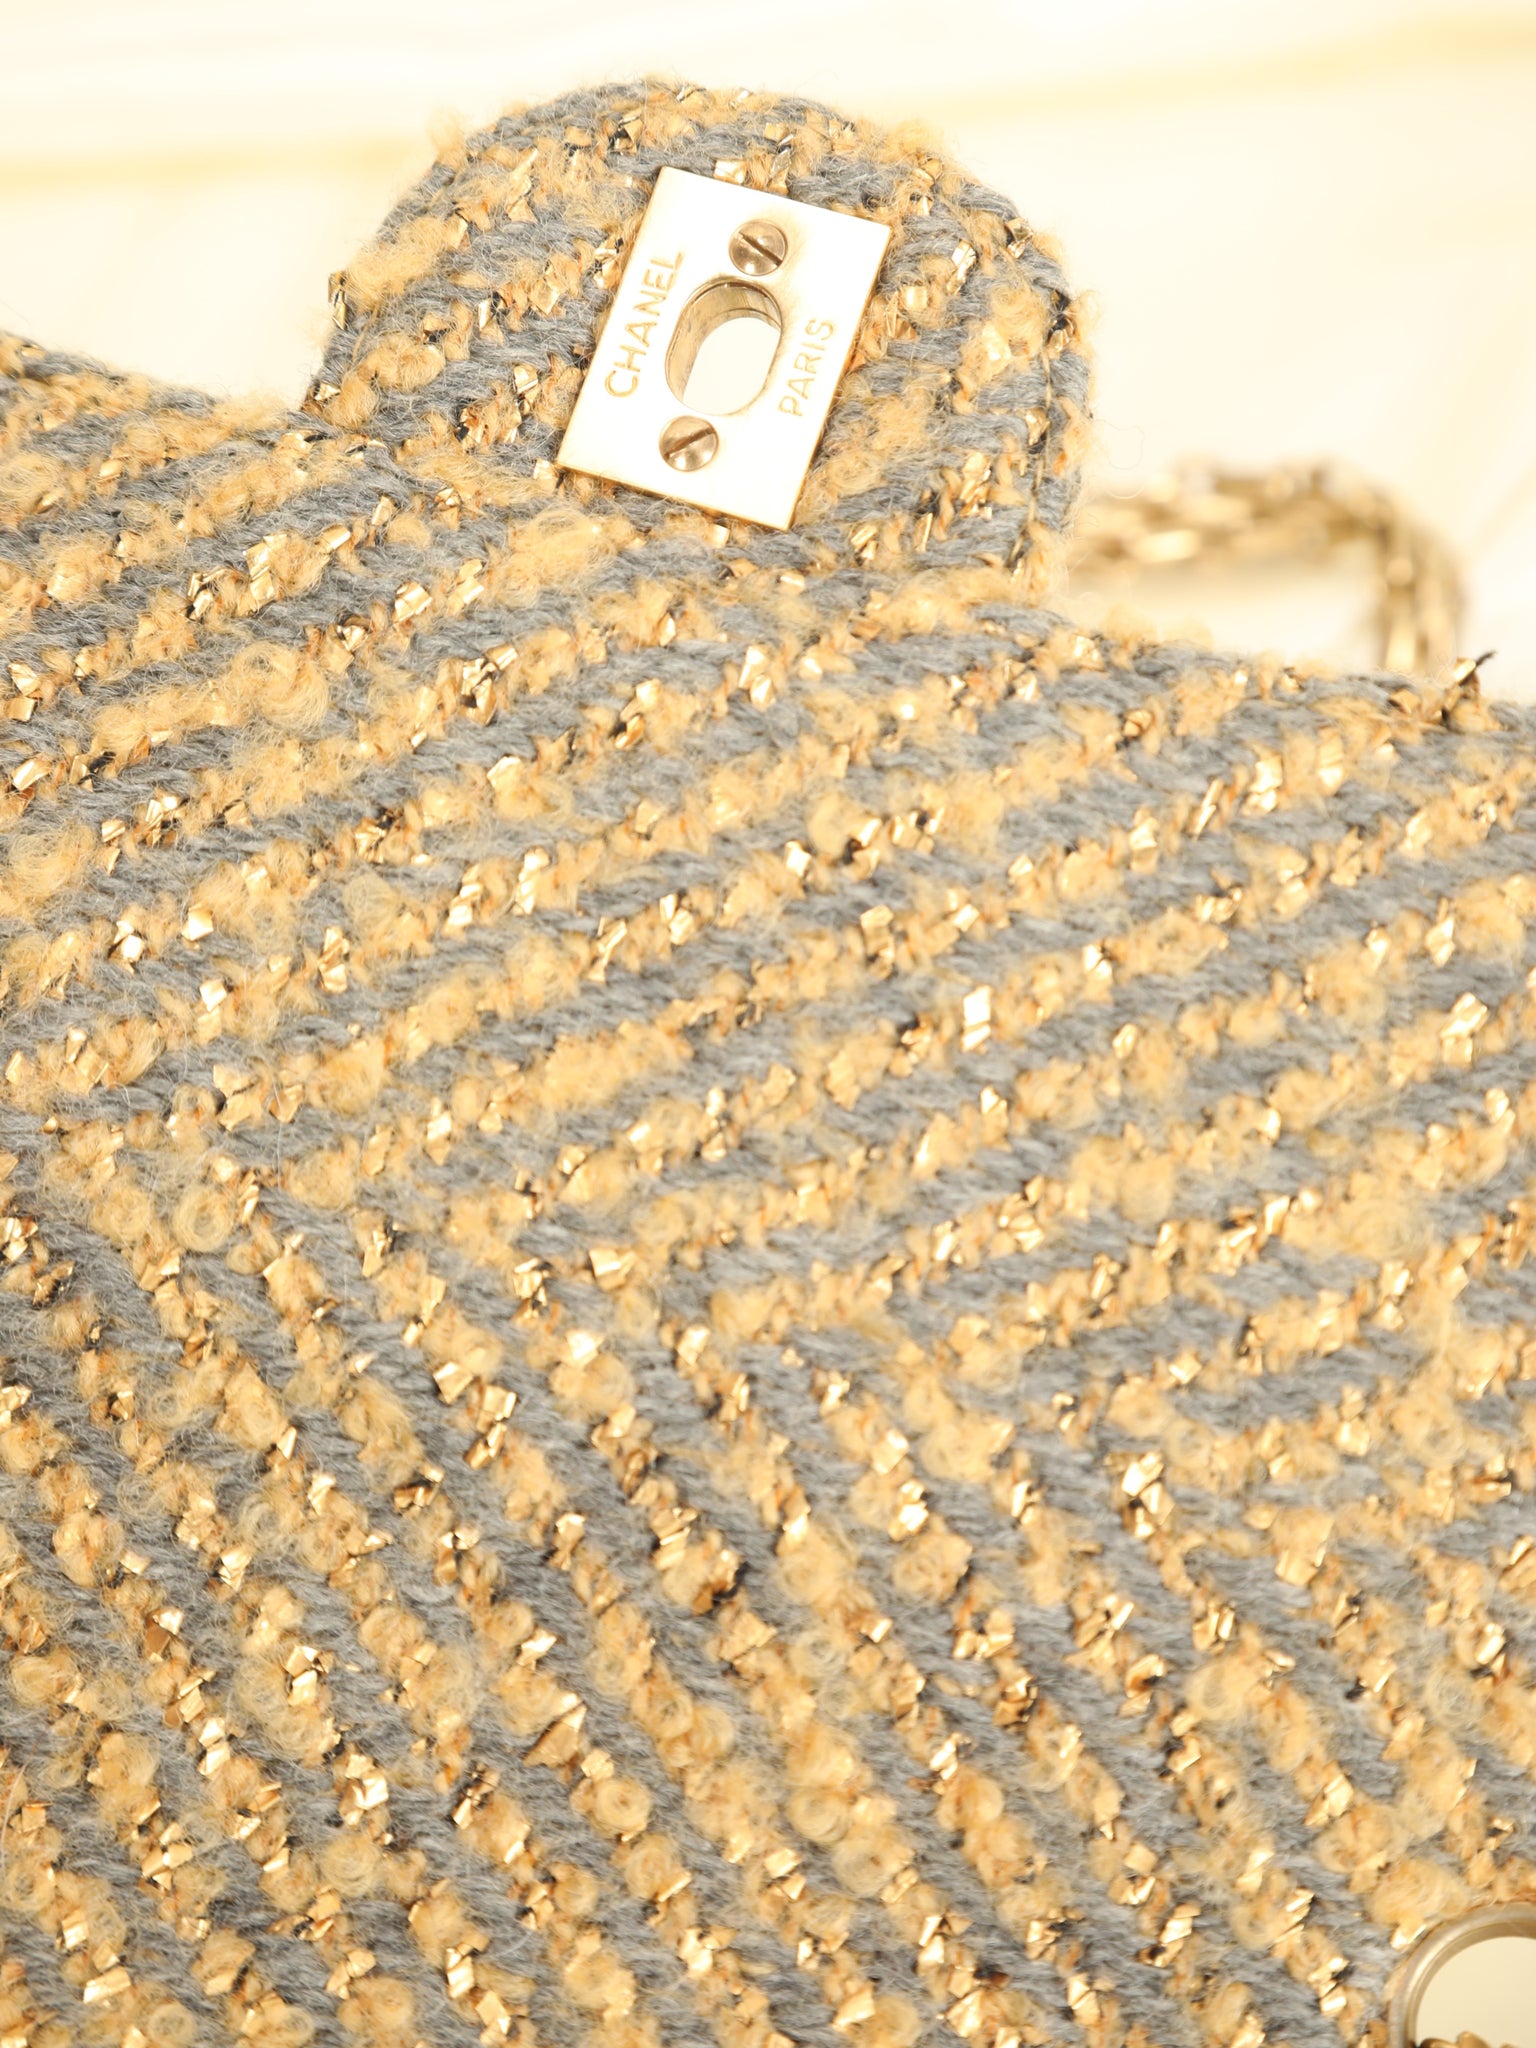 Extremely Rare Chanel Tweed Bijoux Bag – SFN